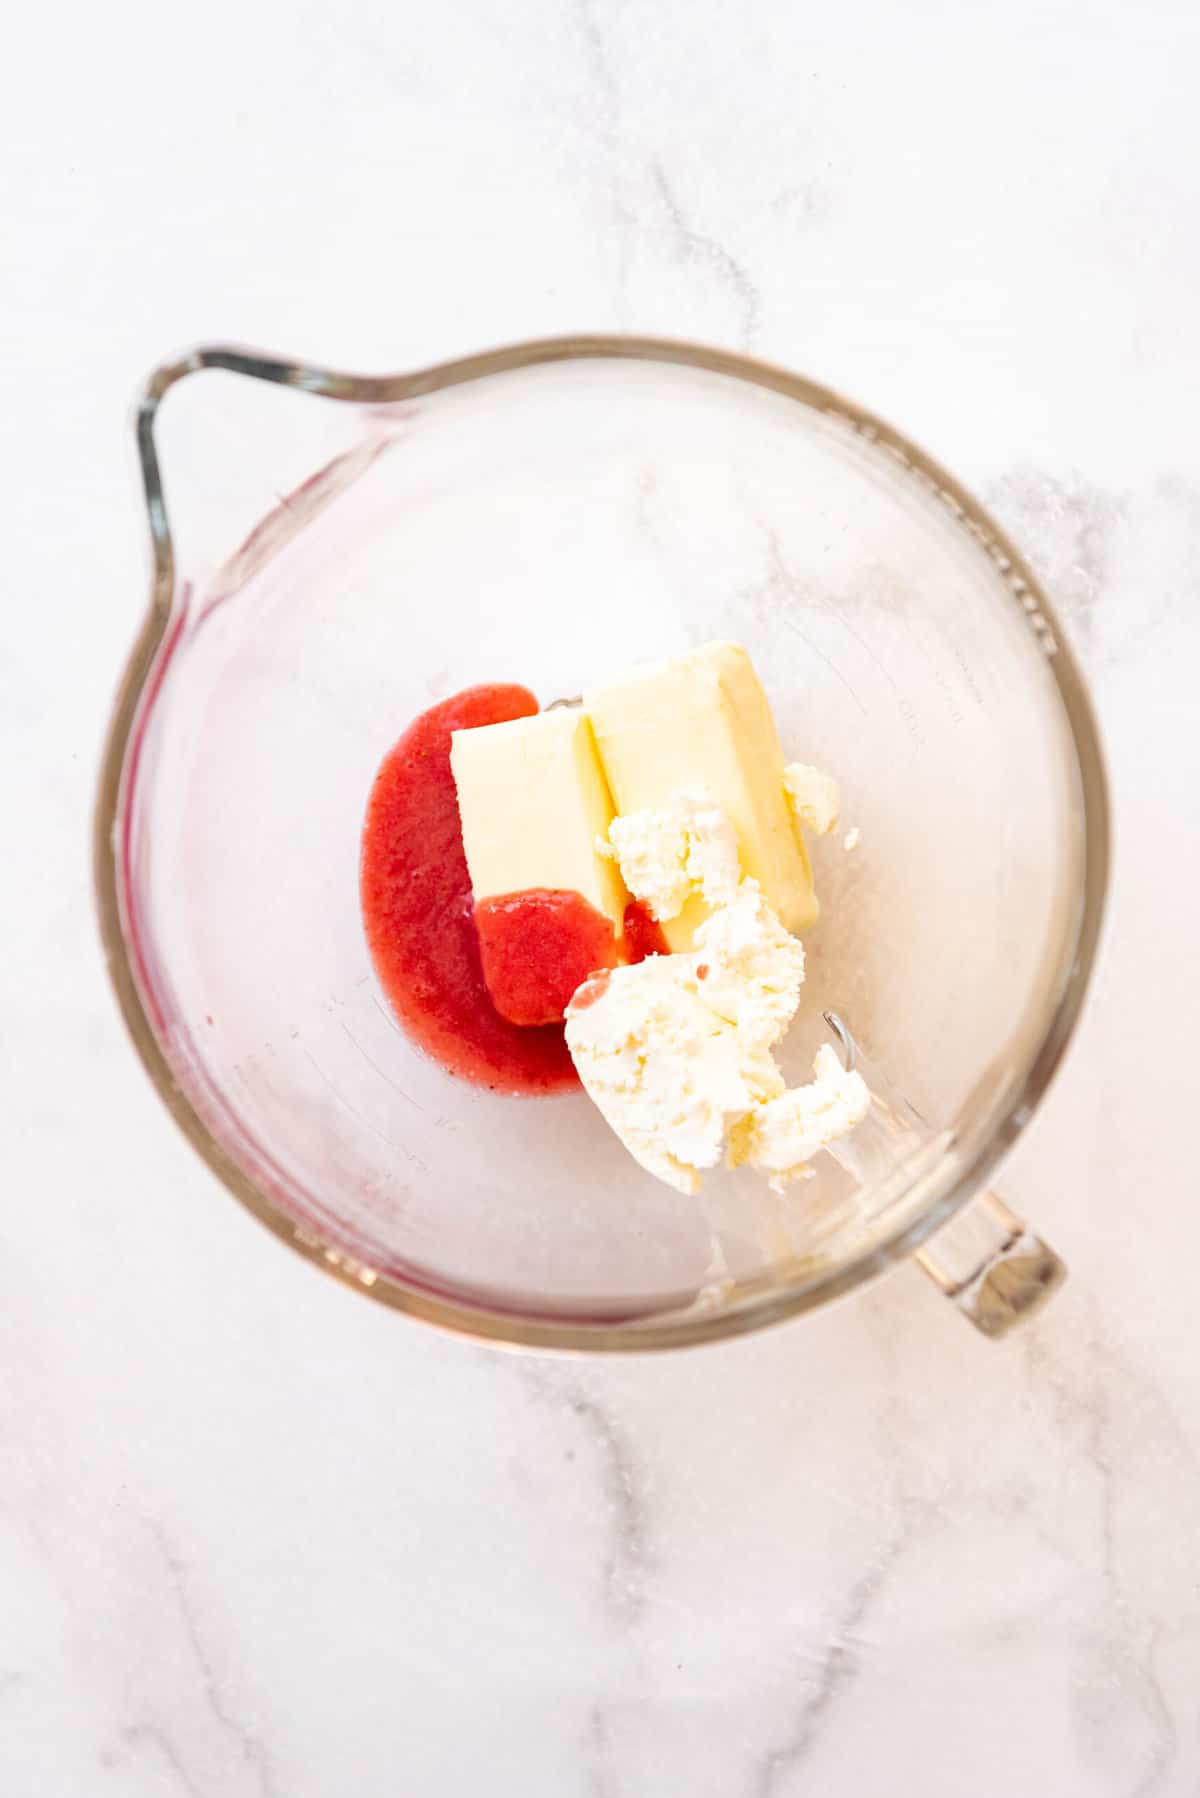 Top view of glass mixing jug with butter, crea cheese and strawberry puree in it. 